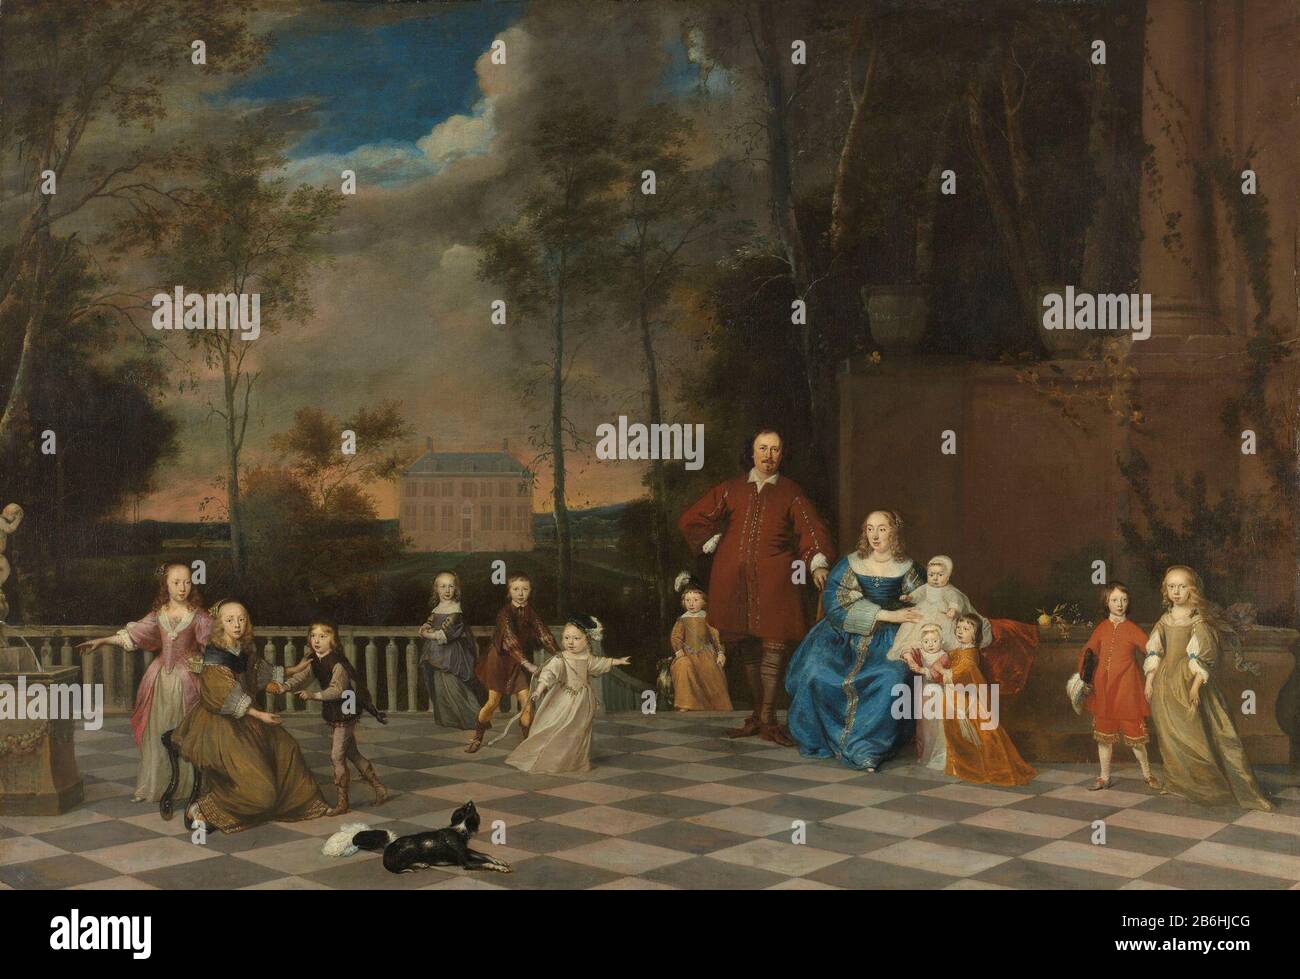 The Amsterdam merchant Jeremias Collen (1619-1707), his wife and their twelve children, SK-A-2416 Portrait of the Amsterdam merchant Jeremias Collen, his wife and their twelve children. Presented on a terrace in the distance the hofstede Velserbeek. Manufacturer : painter: Pieter van Anraedt (attributed to) Date: 1655 - 1657 Physical characteristics: oil on canvas material: cloth oil Dimensions: carrier: h 107 cm. B × 155 cm. outer size: 7 cm d. (Carrier including SK-L-3665.)  Subject: historical person historical persons - BB - woman merchant, salesman family group, especially parents withthe Stock Photo